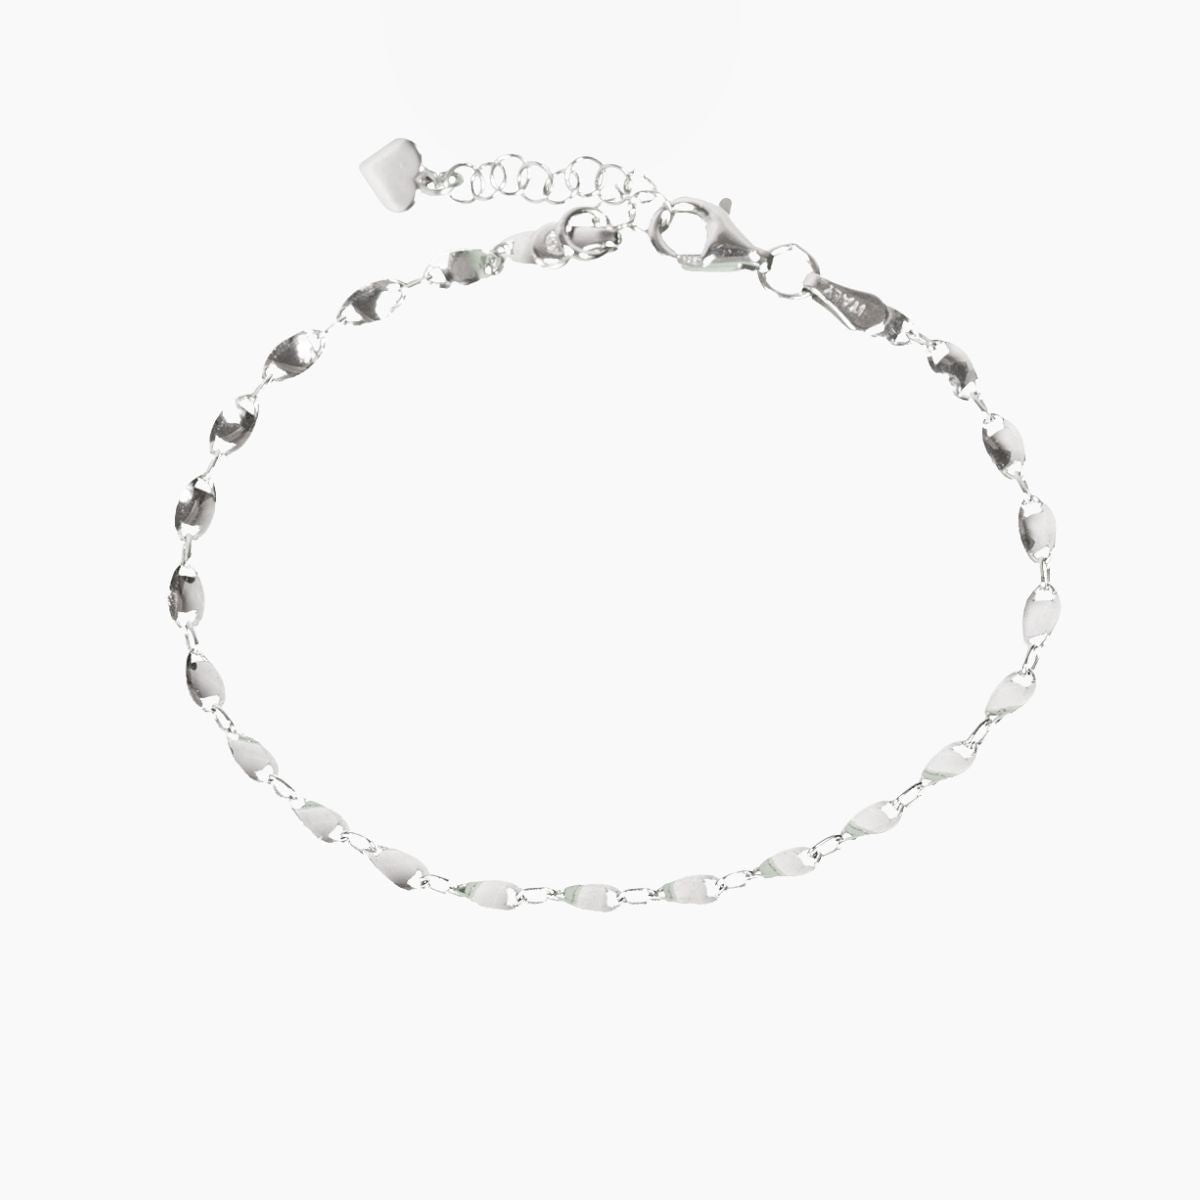 Petit CD Bracelet Silver-Finish Metal with White Crystals